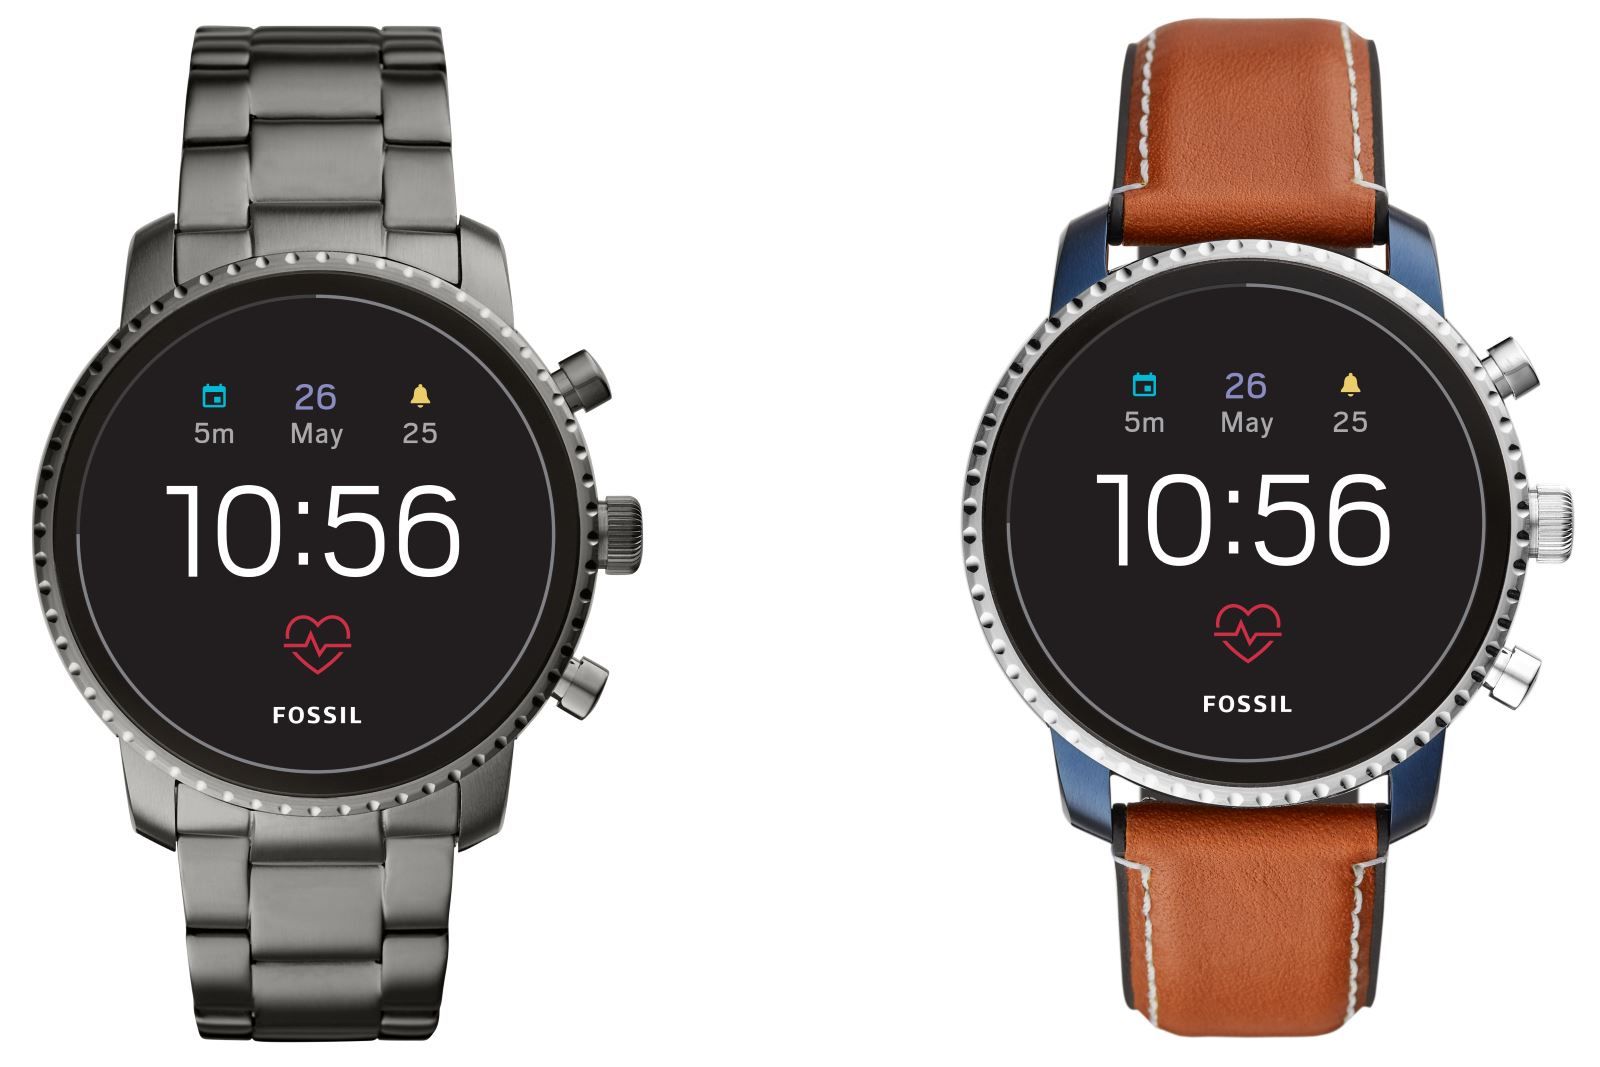 Fossil intros two new Fossil Q smartwatches